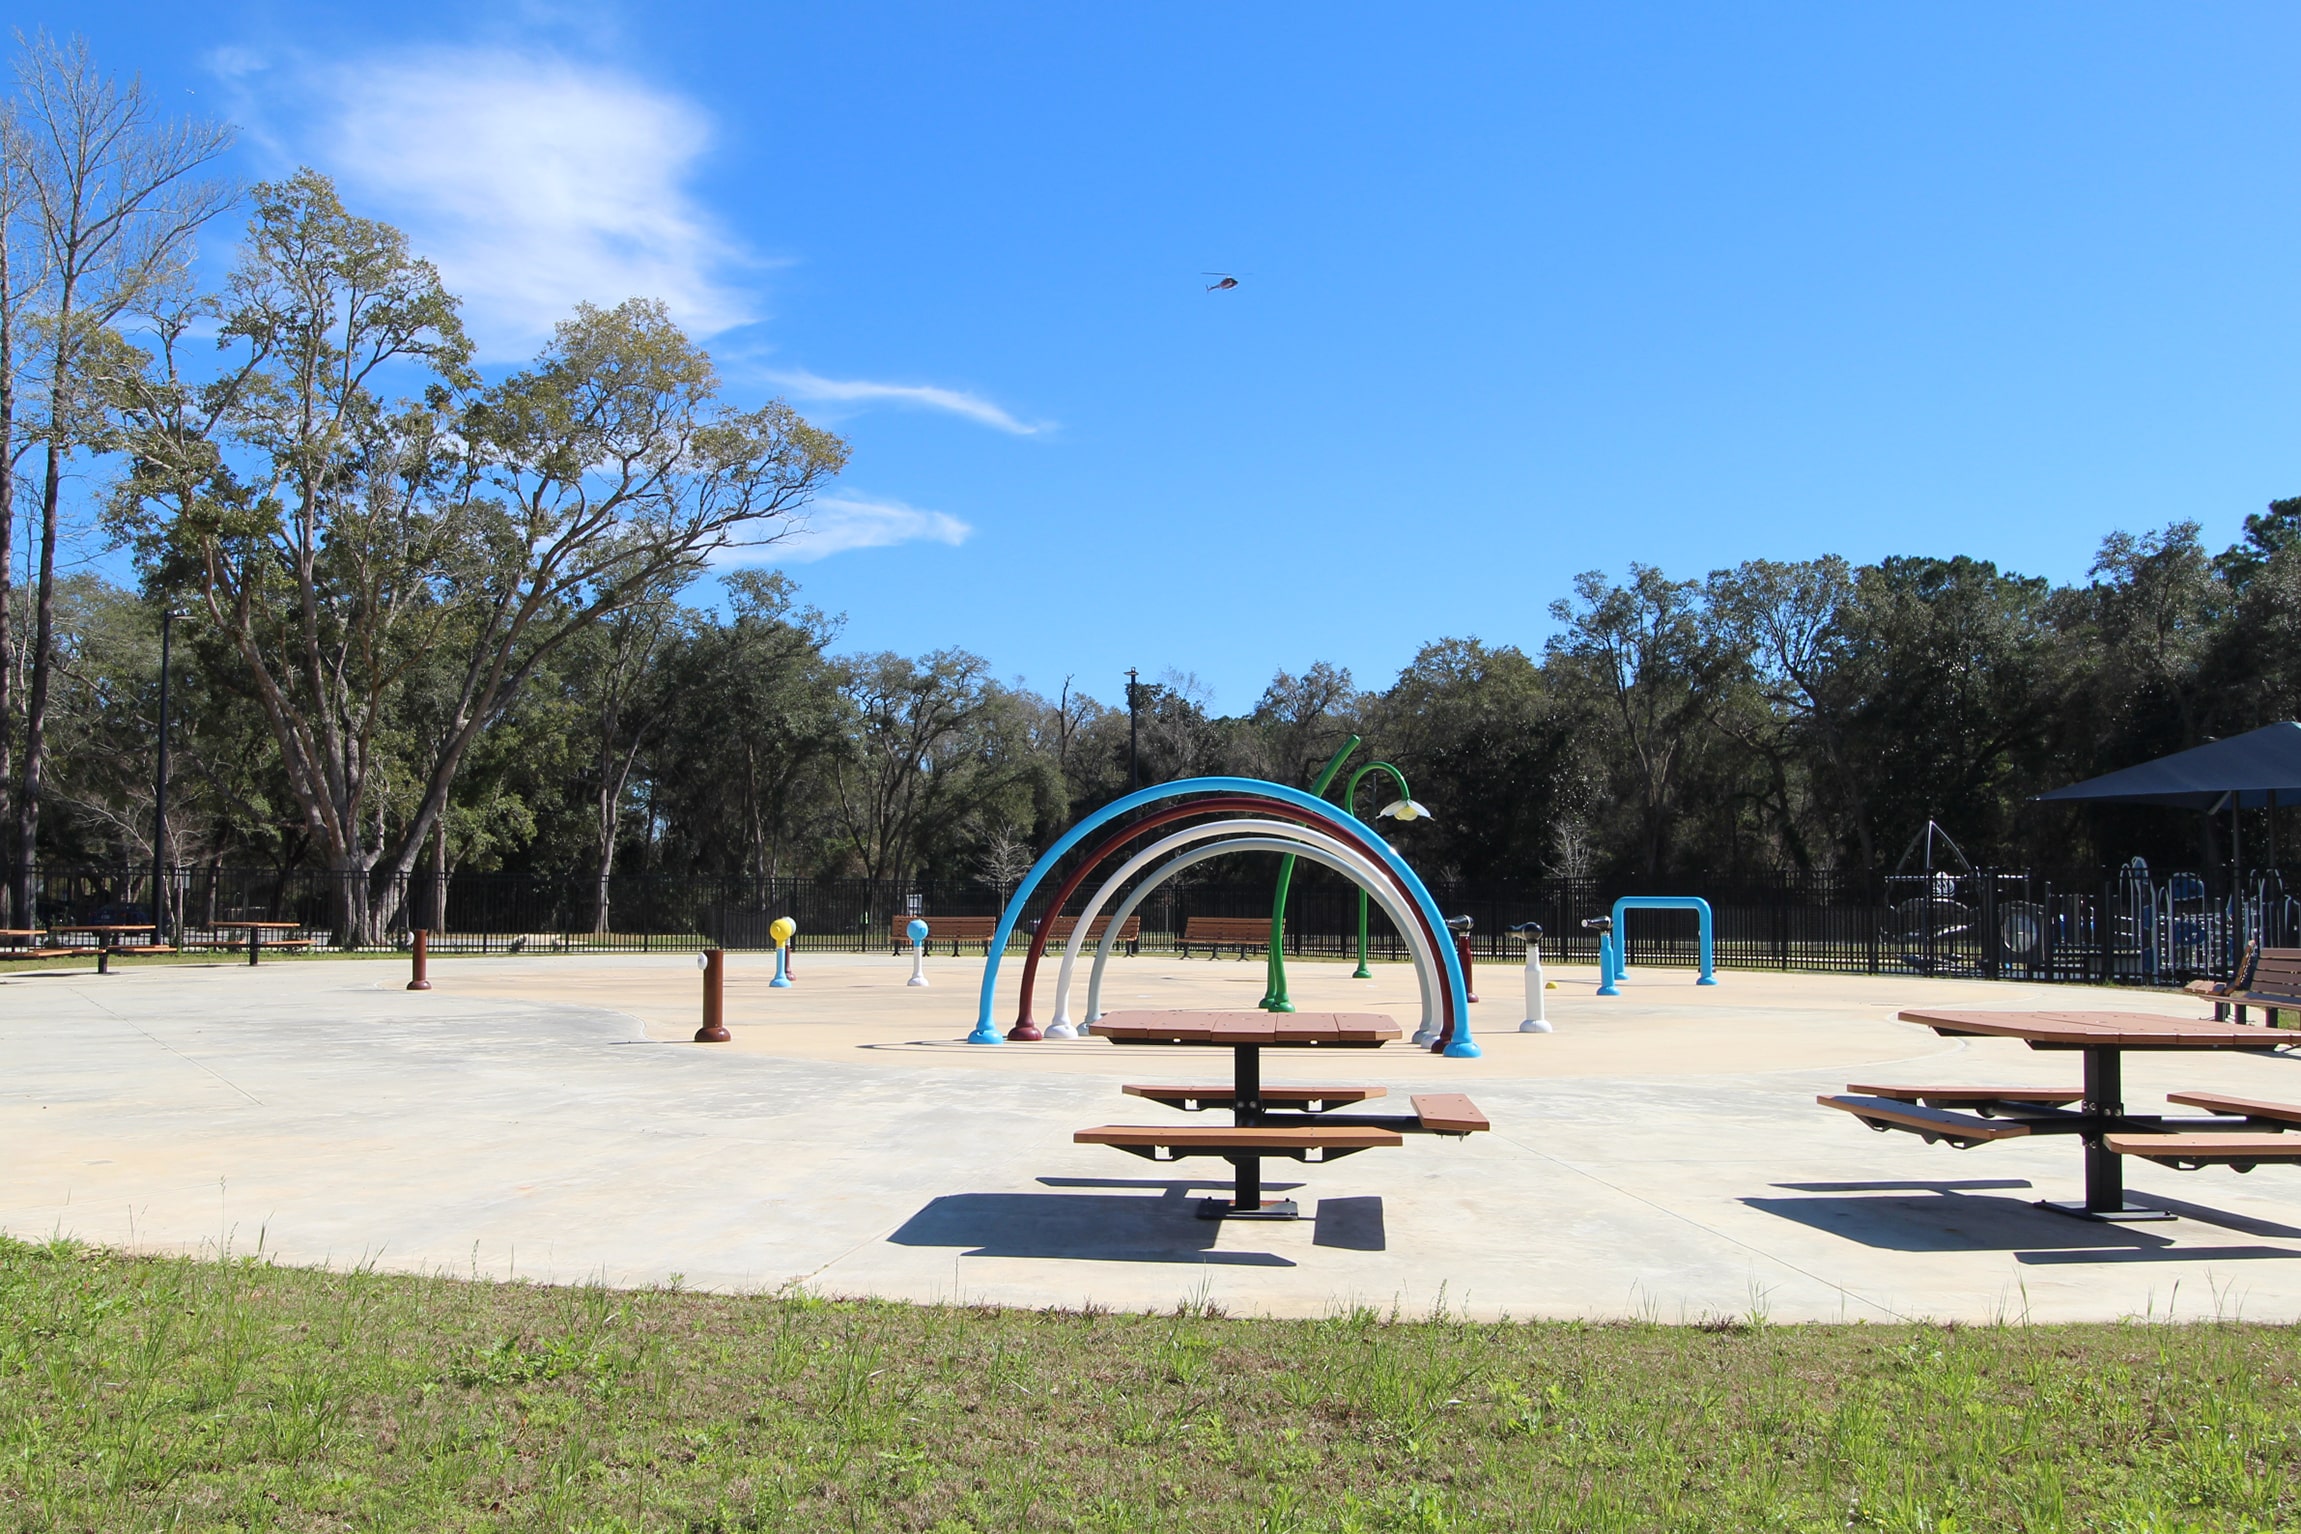 Splash pad at Benny Russell Park in Pace